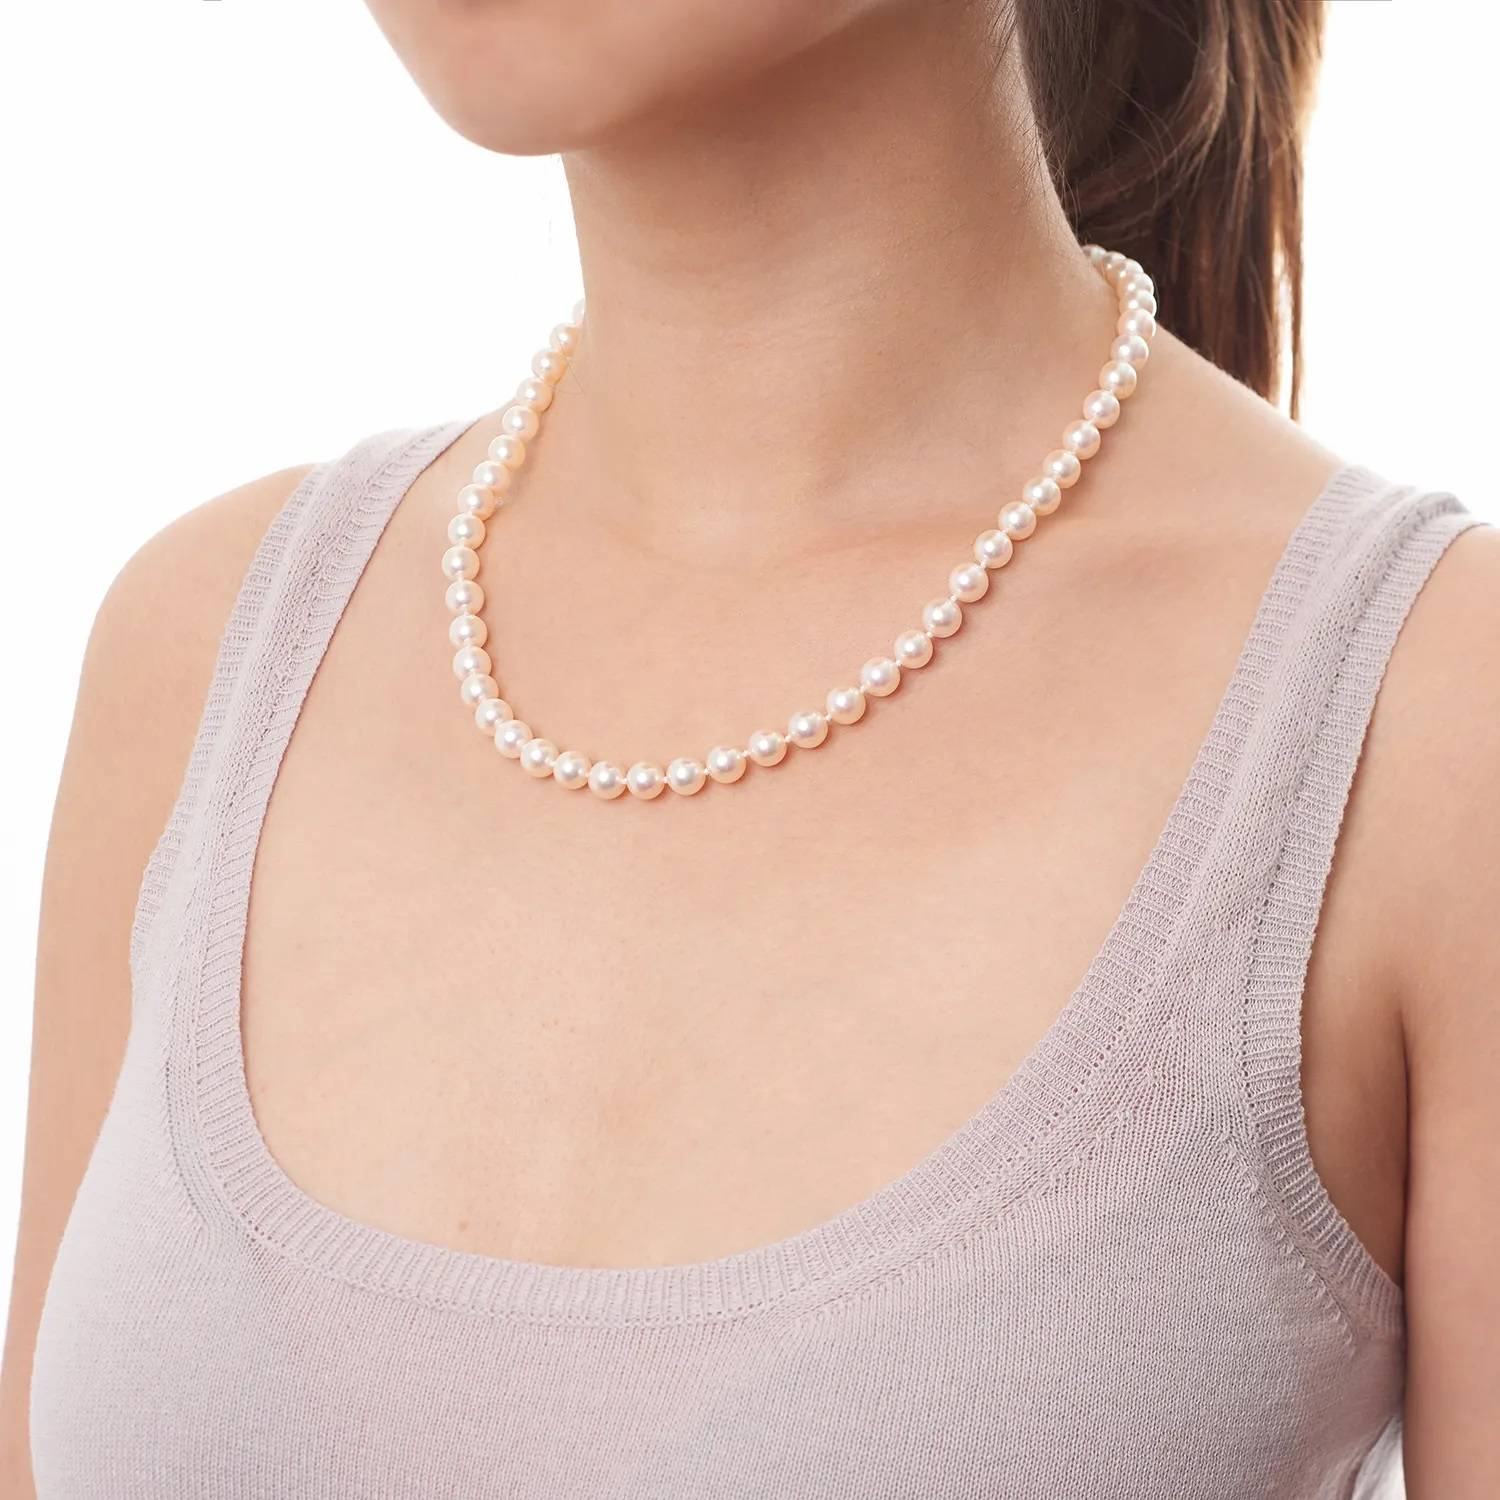 Model wearing a 7.0-7.5mm White Pearl Necklace